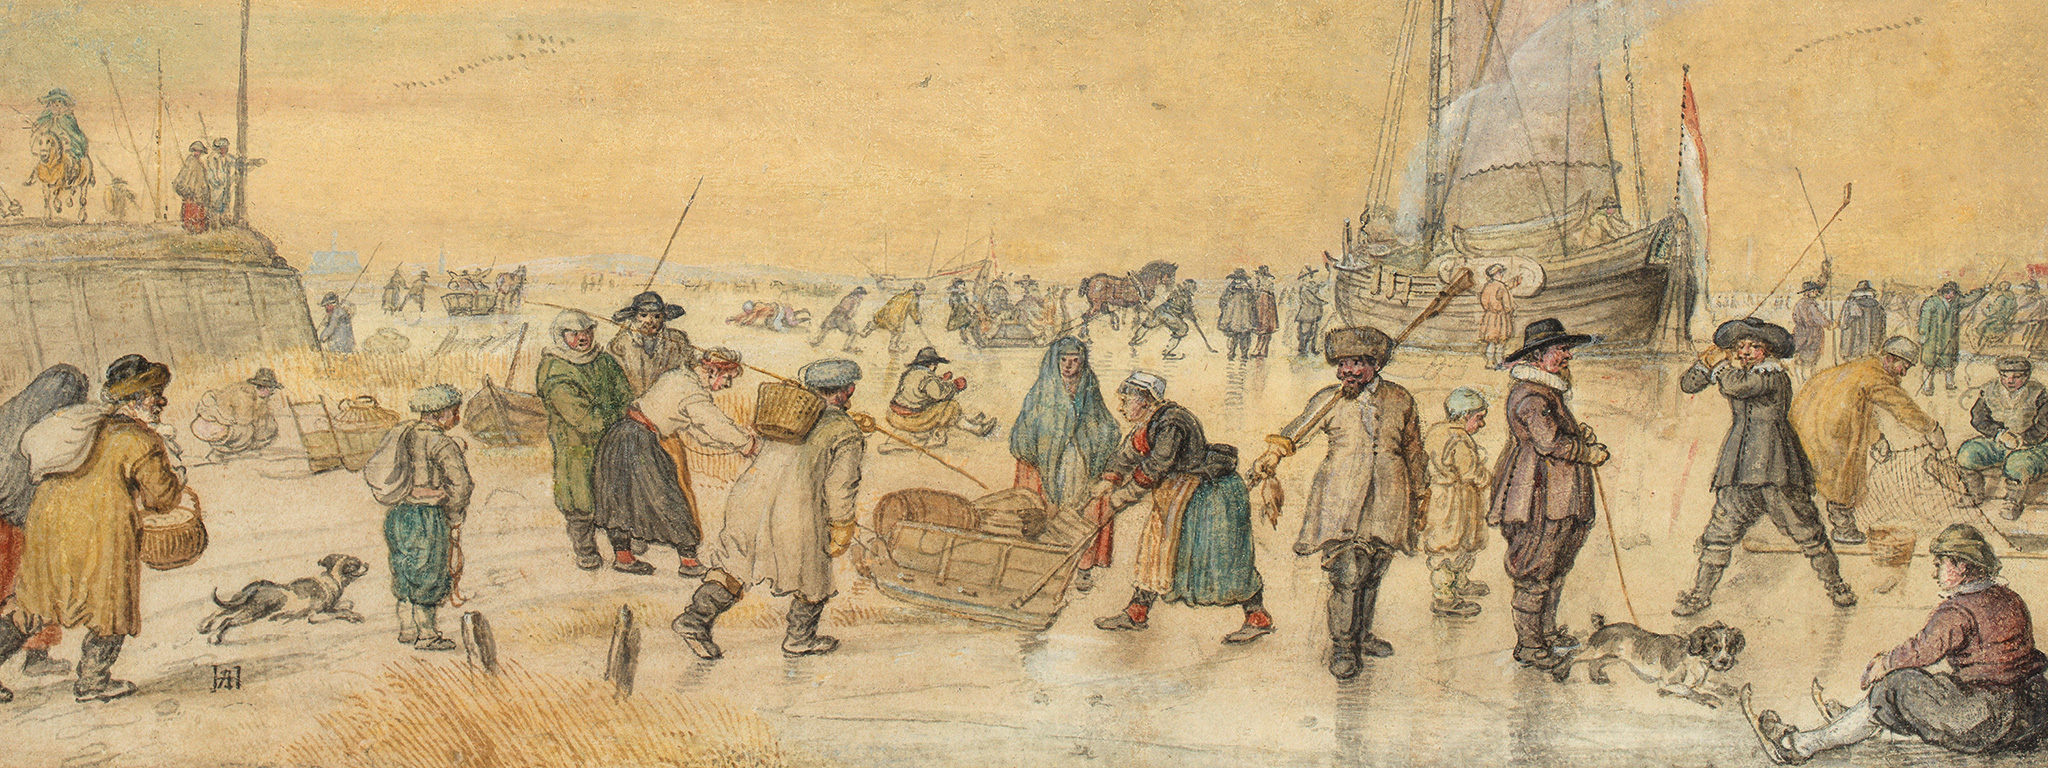 Skaters, Colf Players, and Sleighs on a Frozen River with a Ship at Right and a Dike at Left, 1624, Hendrick Avercamp. Translucent and opaque watercolor and pen and brown ink, over traces of graphite. Private collection